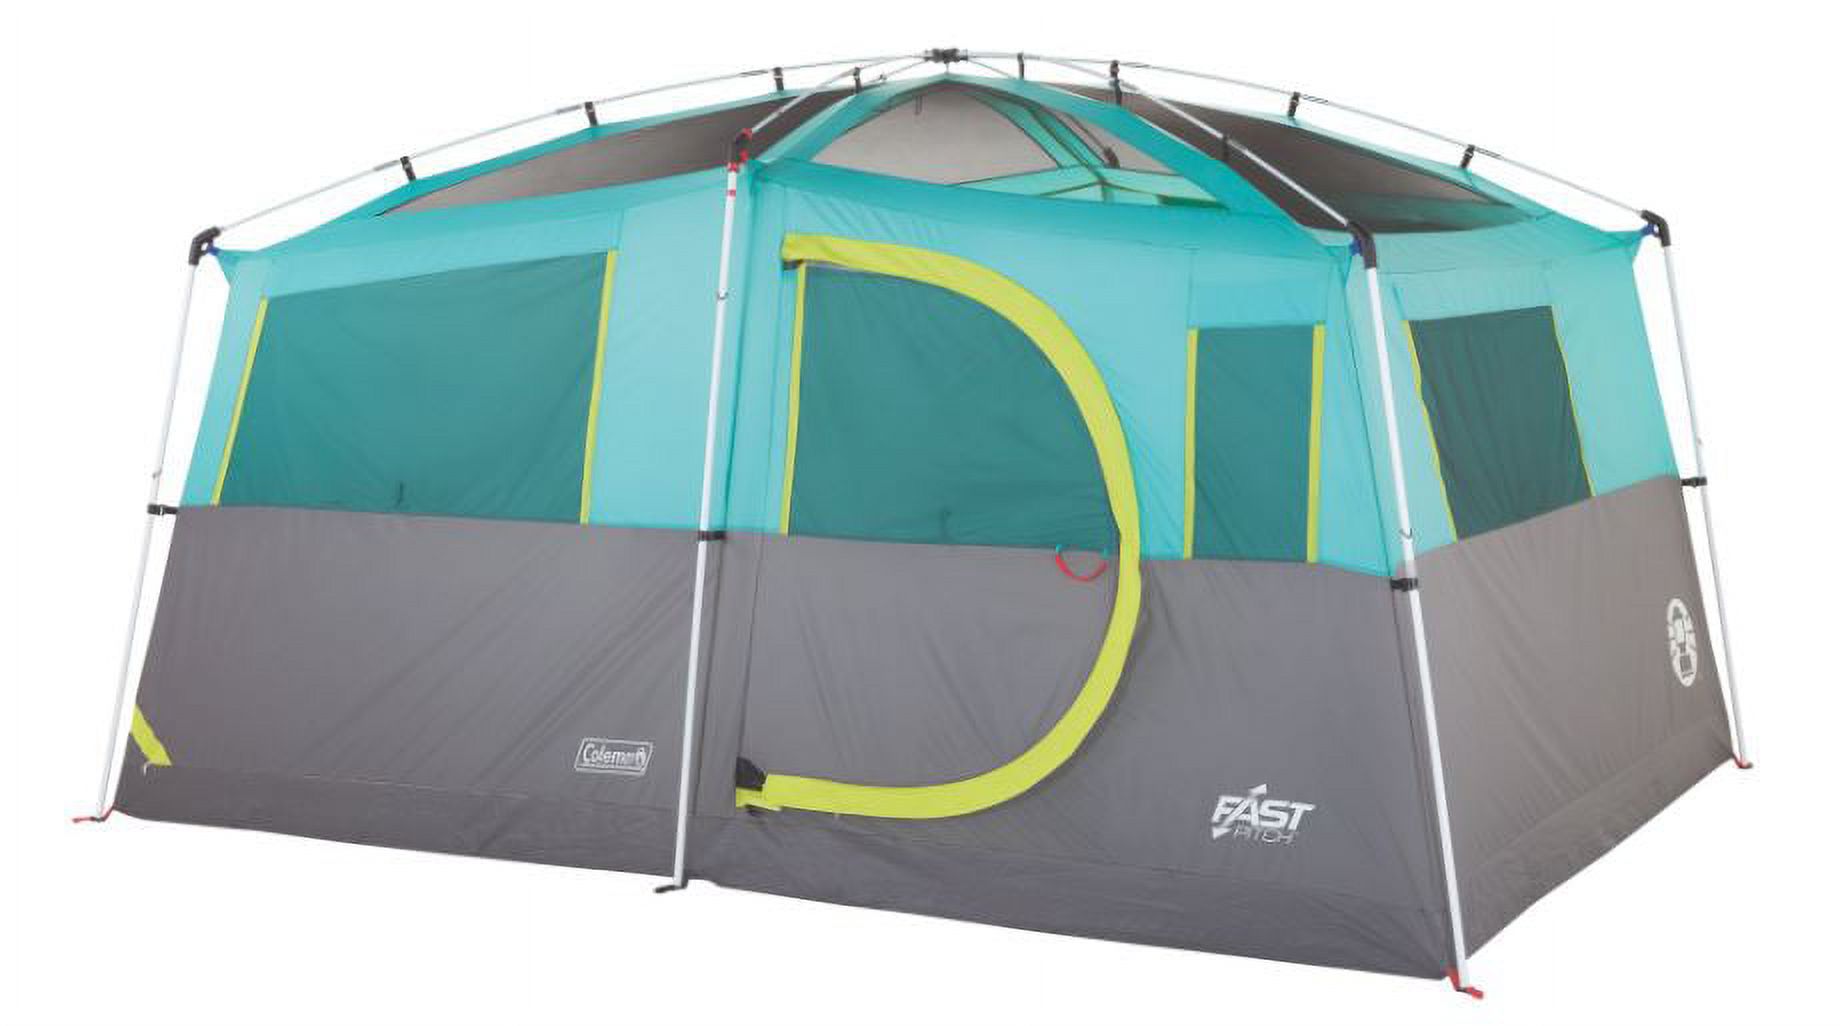 Coleman Tenaya Lake 8 Person Lighted Fast Pitch Cabin Tent, 1 Room, Teal - image 3 of 5